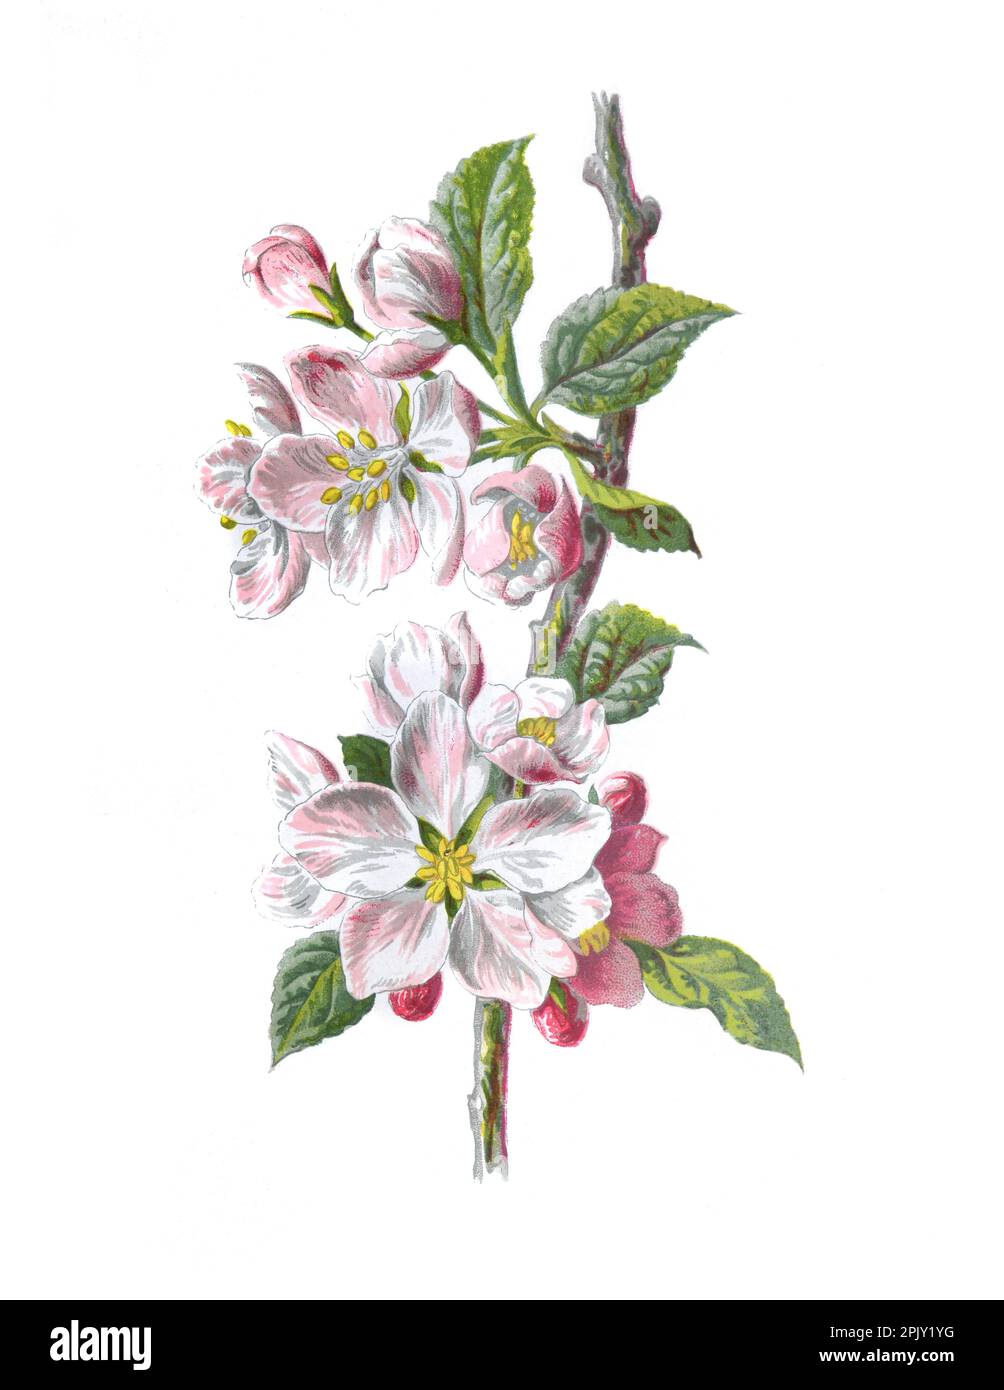 Apple blossom flower. (Malus domestica). Antique hand drawn flowers illustration. Vintage and antique flowers. wild flower illustration. Stock Photo